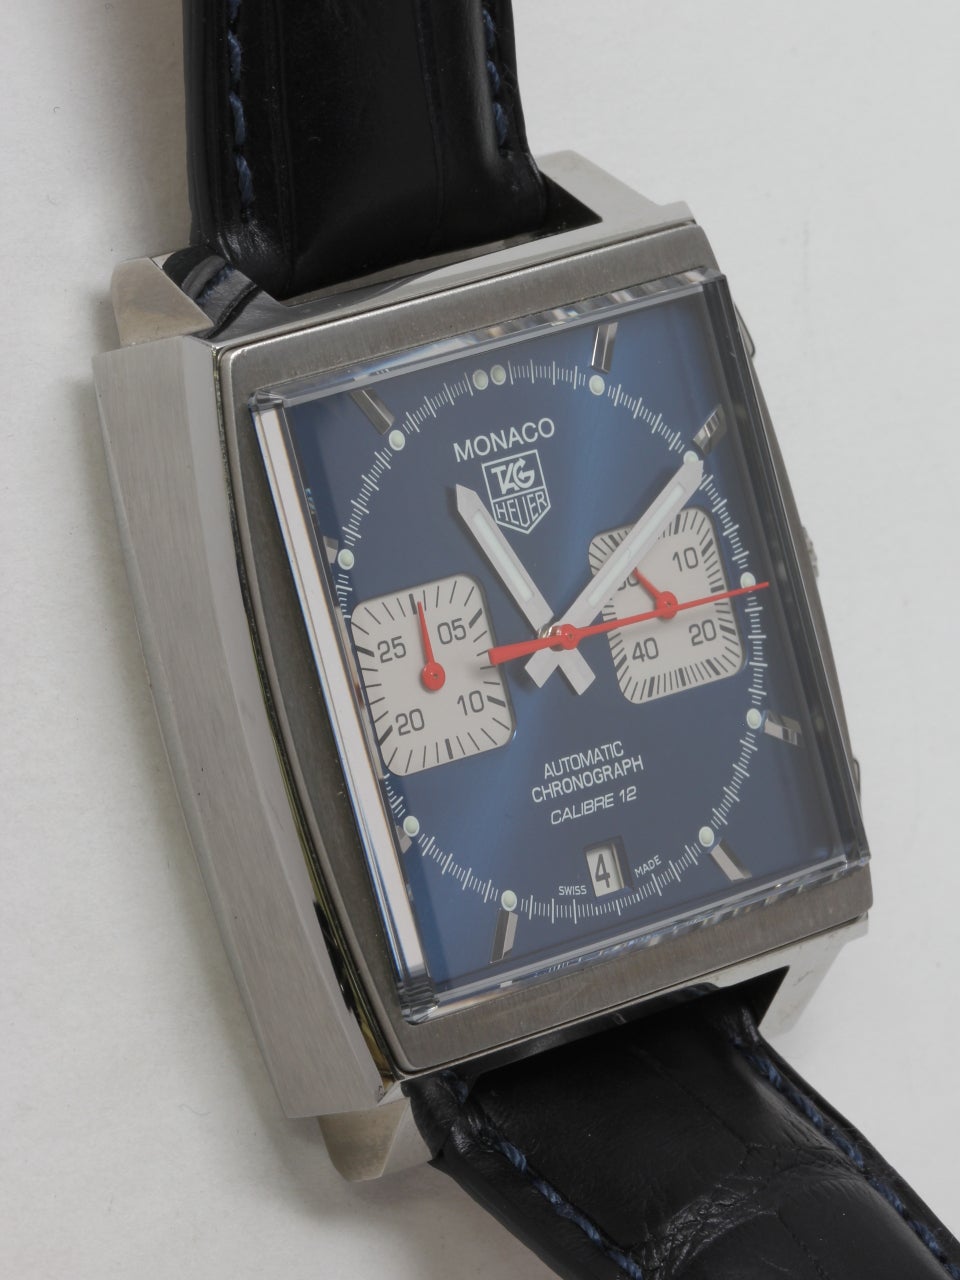 Tag Heuer Stainless Steel Steve McQueen Monaco Reissue Wristwatch ref # CCW2113.BA0780. Square 38mm case measuring 13mm thick. Blue dial with white registers at 3 and 9 o'clock.  Powered by automatic movement with date at 6 o'clock. With Tag Heuer